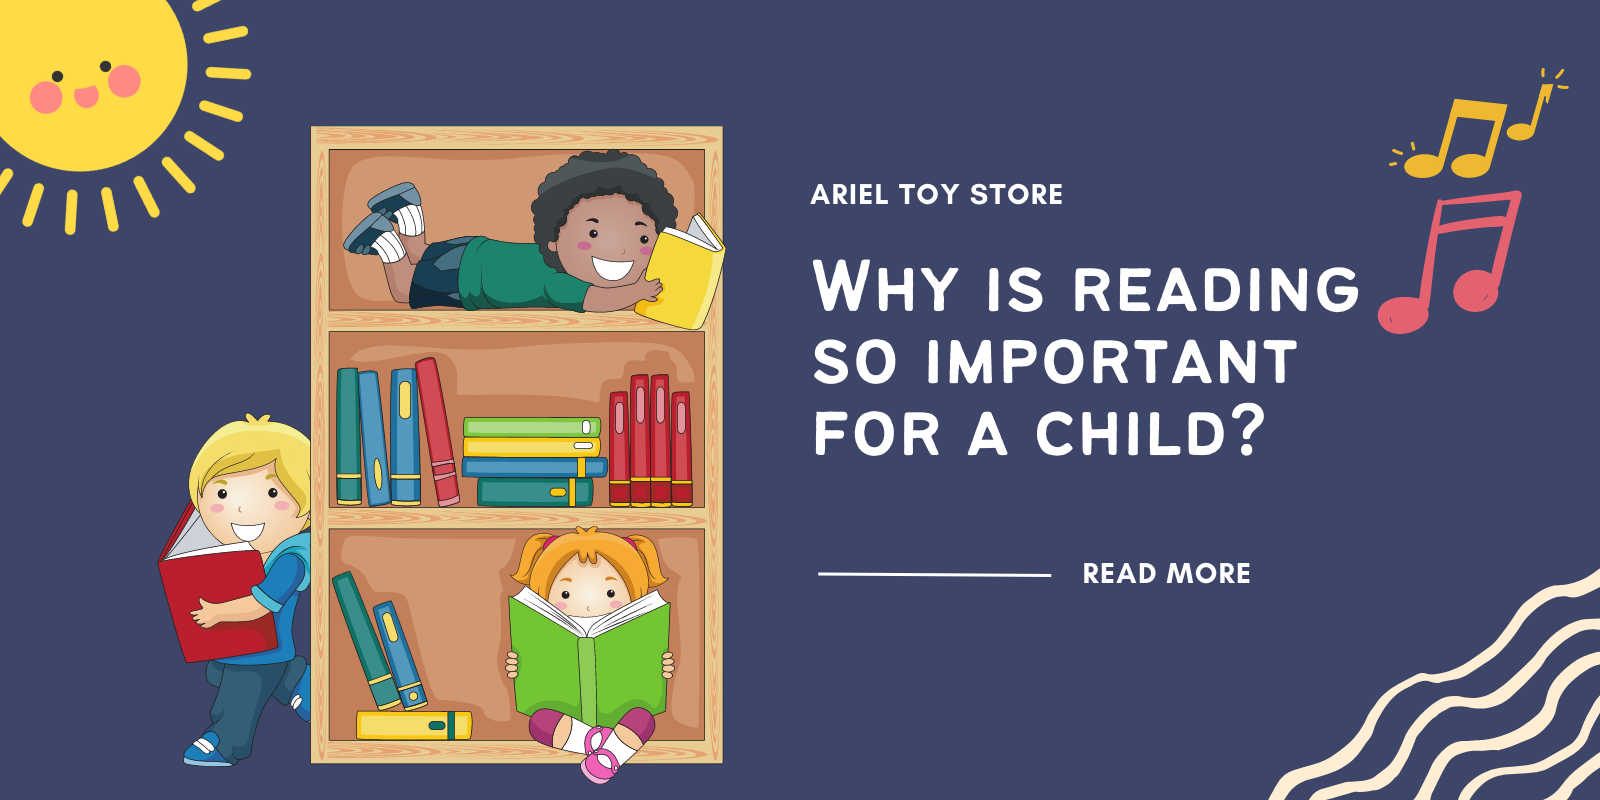 Why is reading so important for a child?